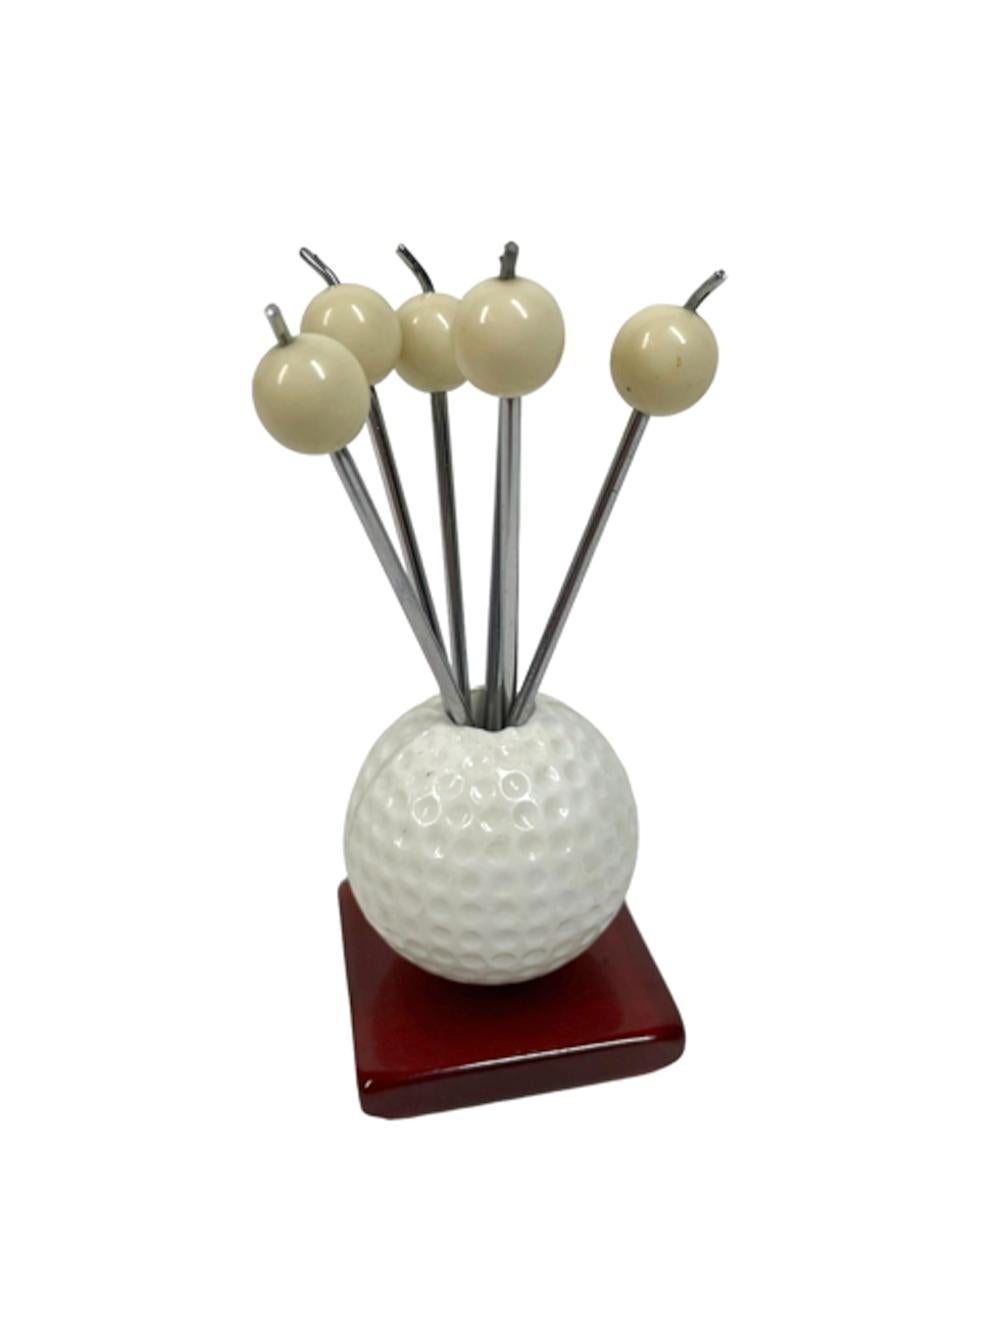 20th Century Art Deco Golf Theme Bakelite and Plastic Cocktail Picks and Holder For Sale